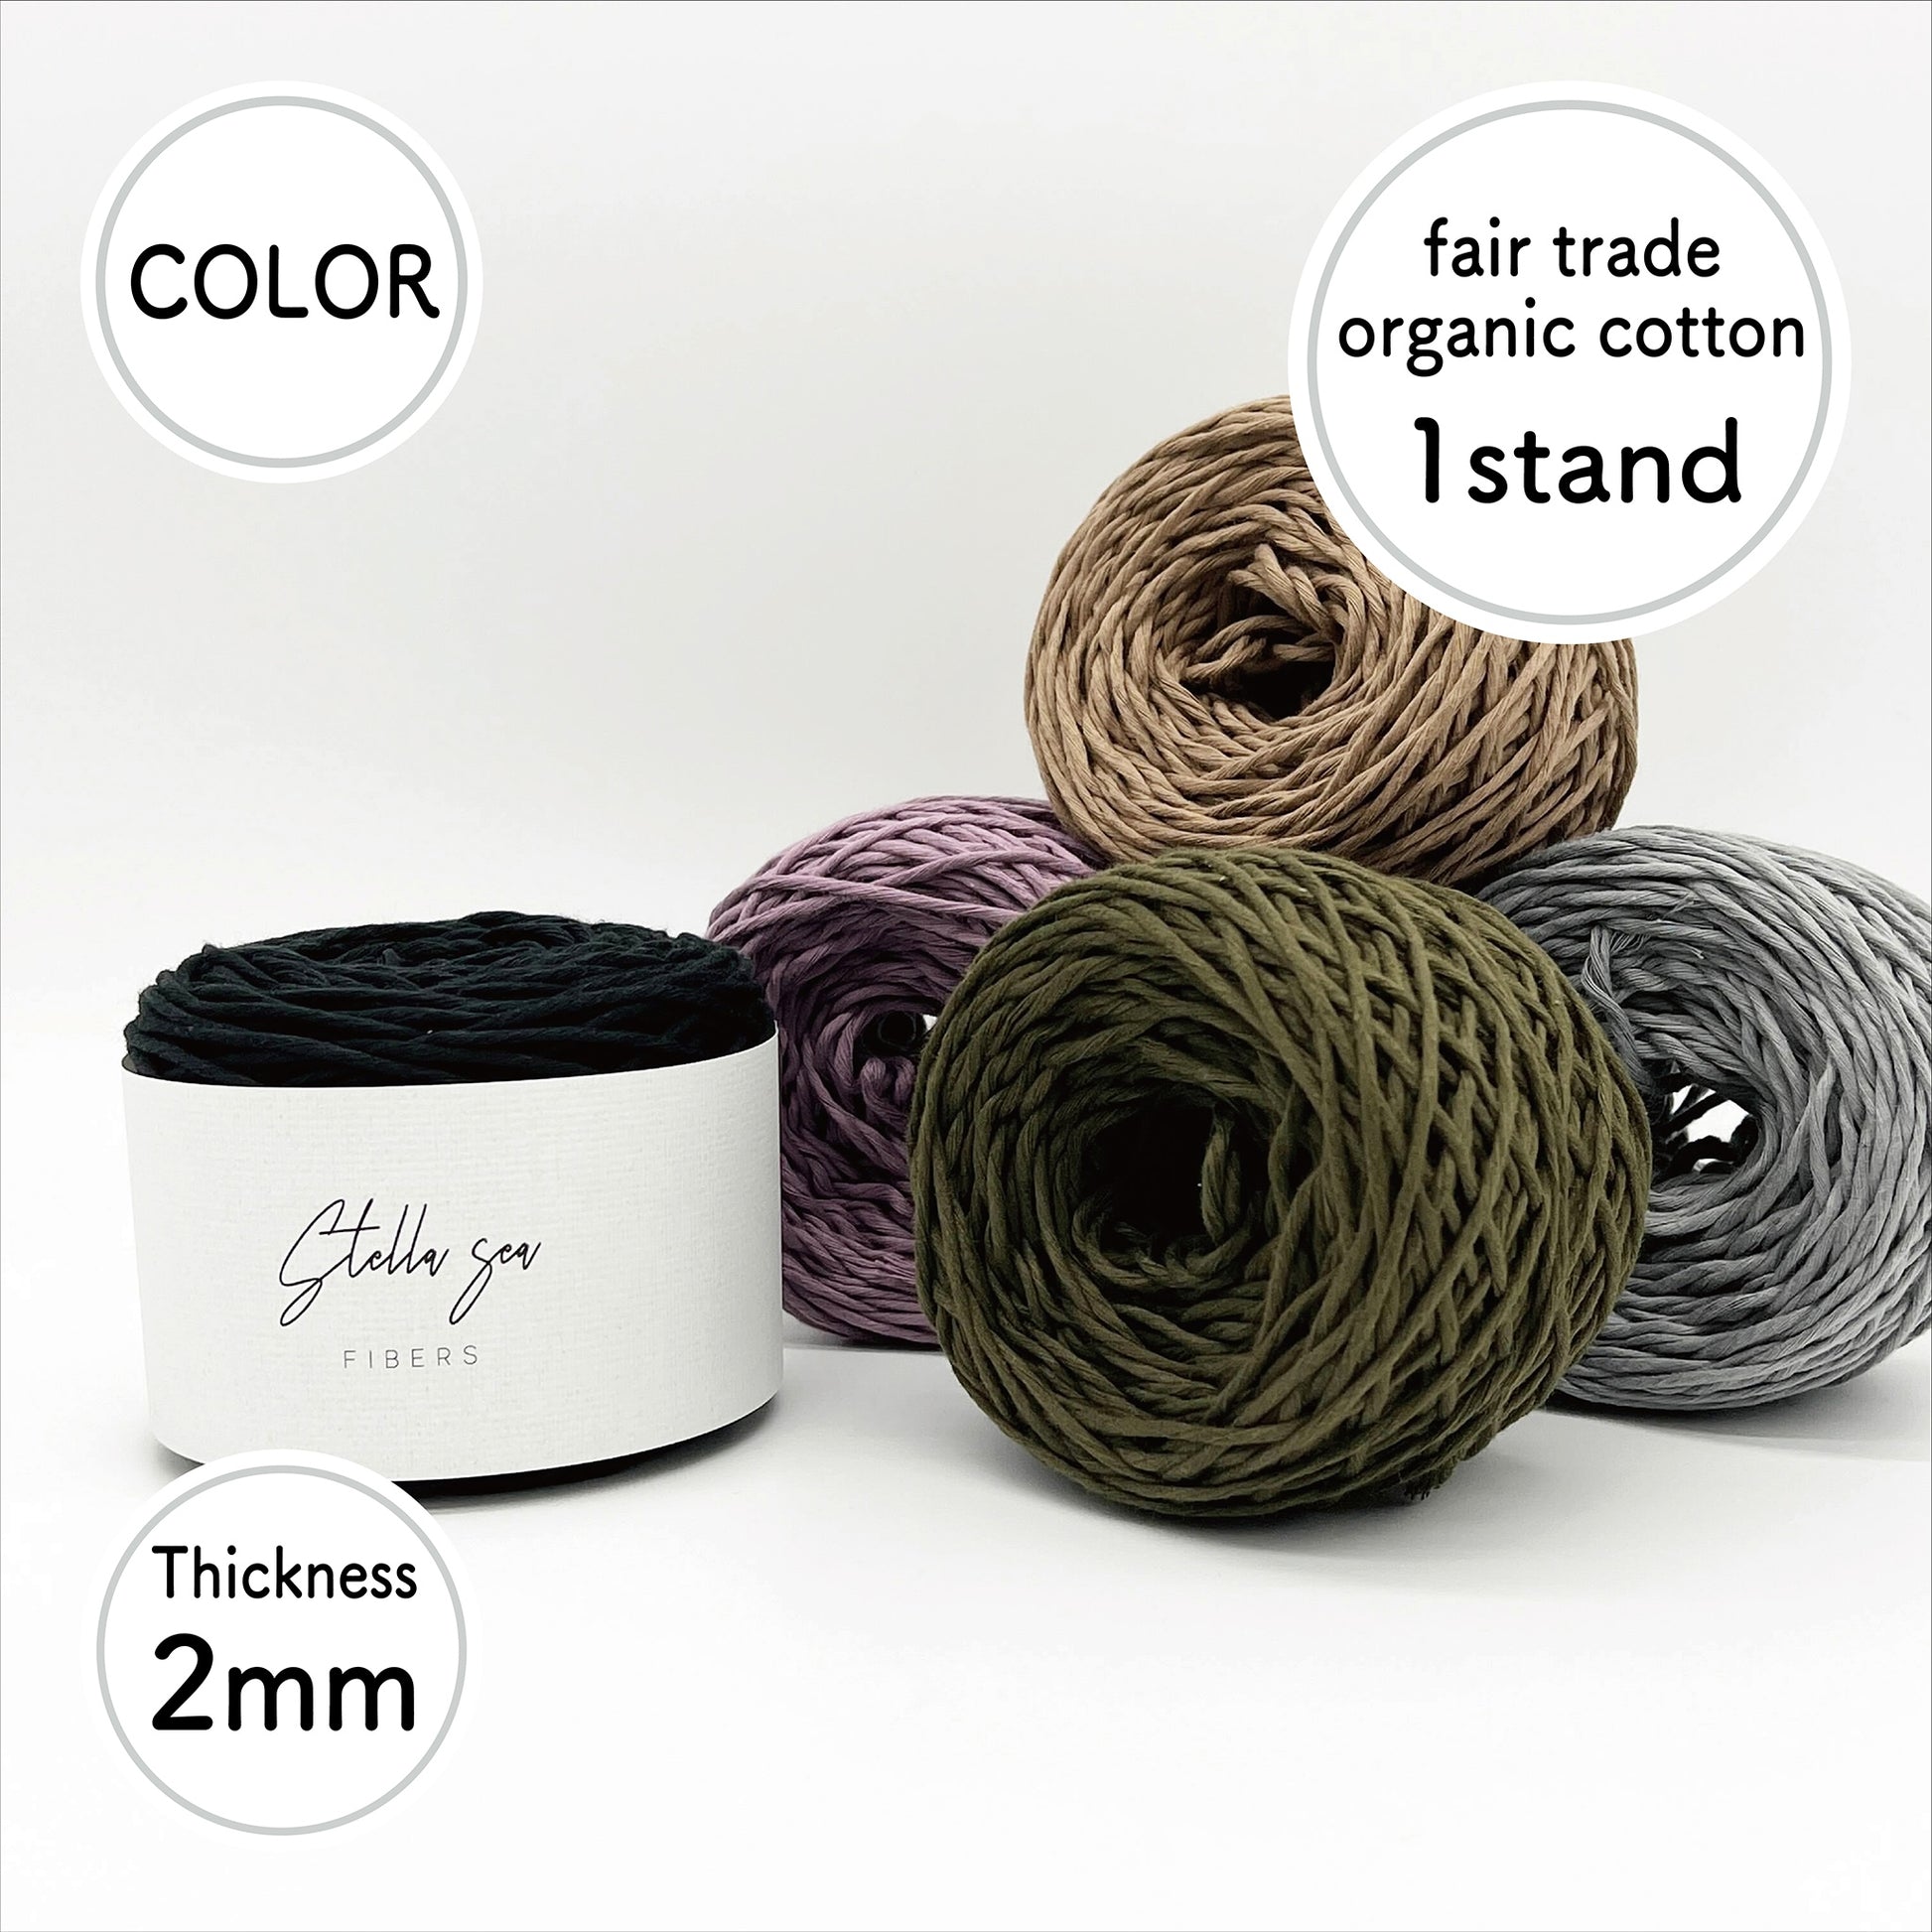 Thick Dark Charcoal Hemp Twine, Thick, 3mm or more, 50m - Fair Go